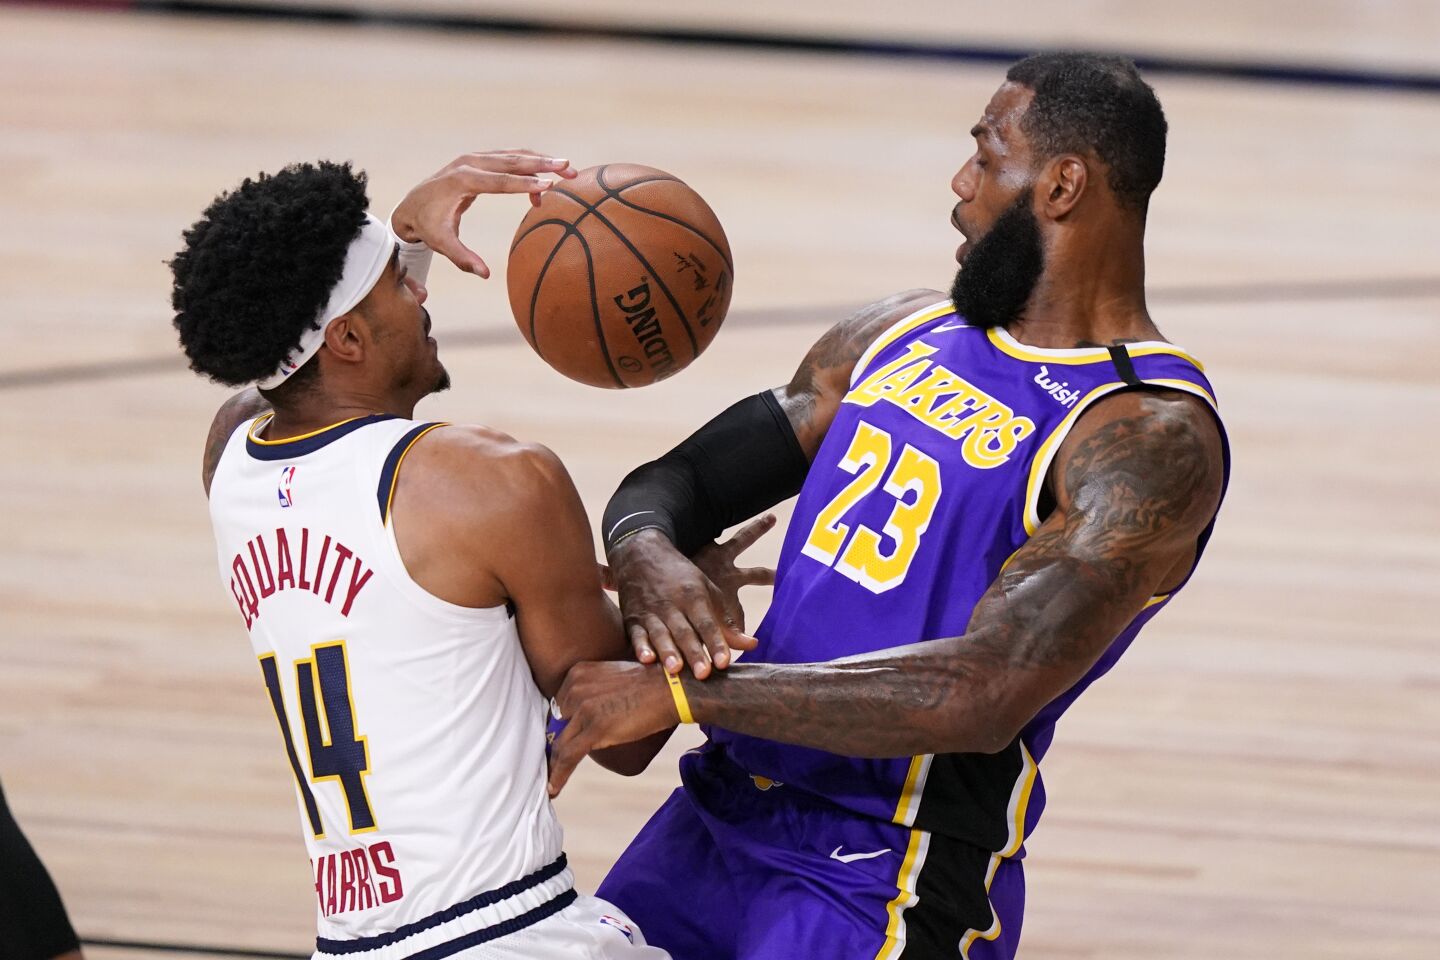 Lakers forward LeBron James takes a charge against Nuggets guard Gary Harris.